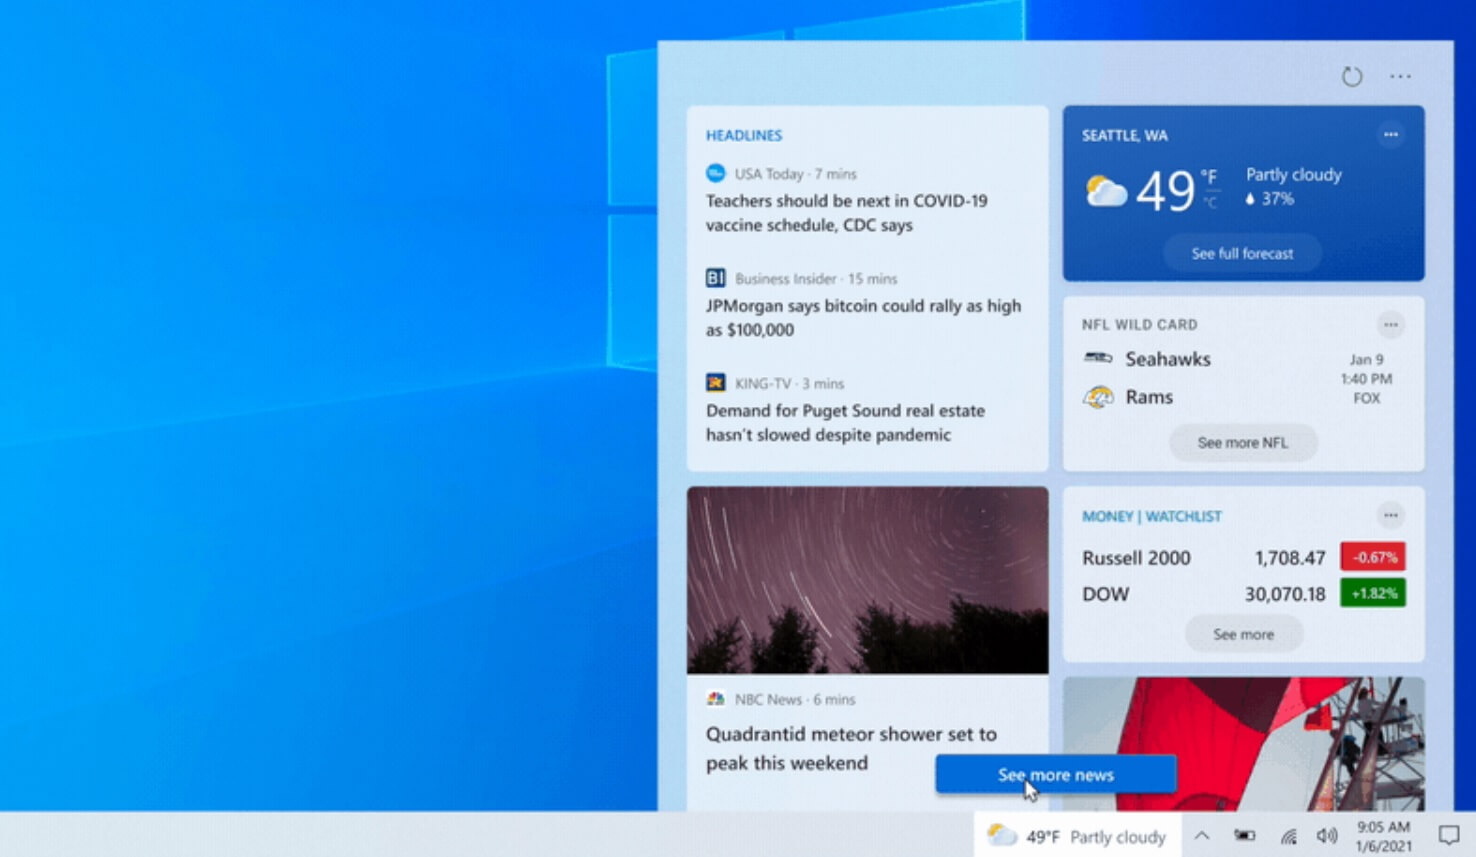 Windows 10’s news and weather feed on taskbar is a mess Windows-10-News-and-Interests.jpg